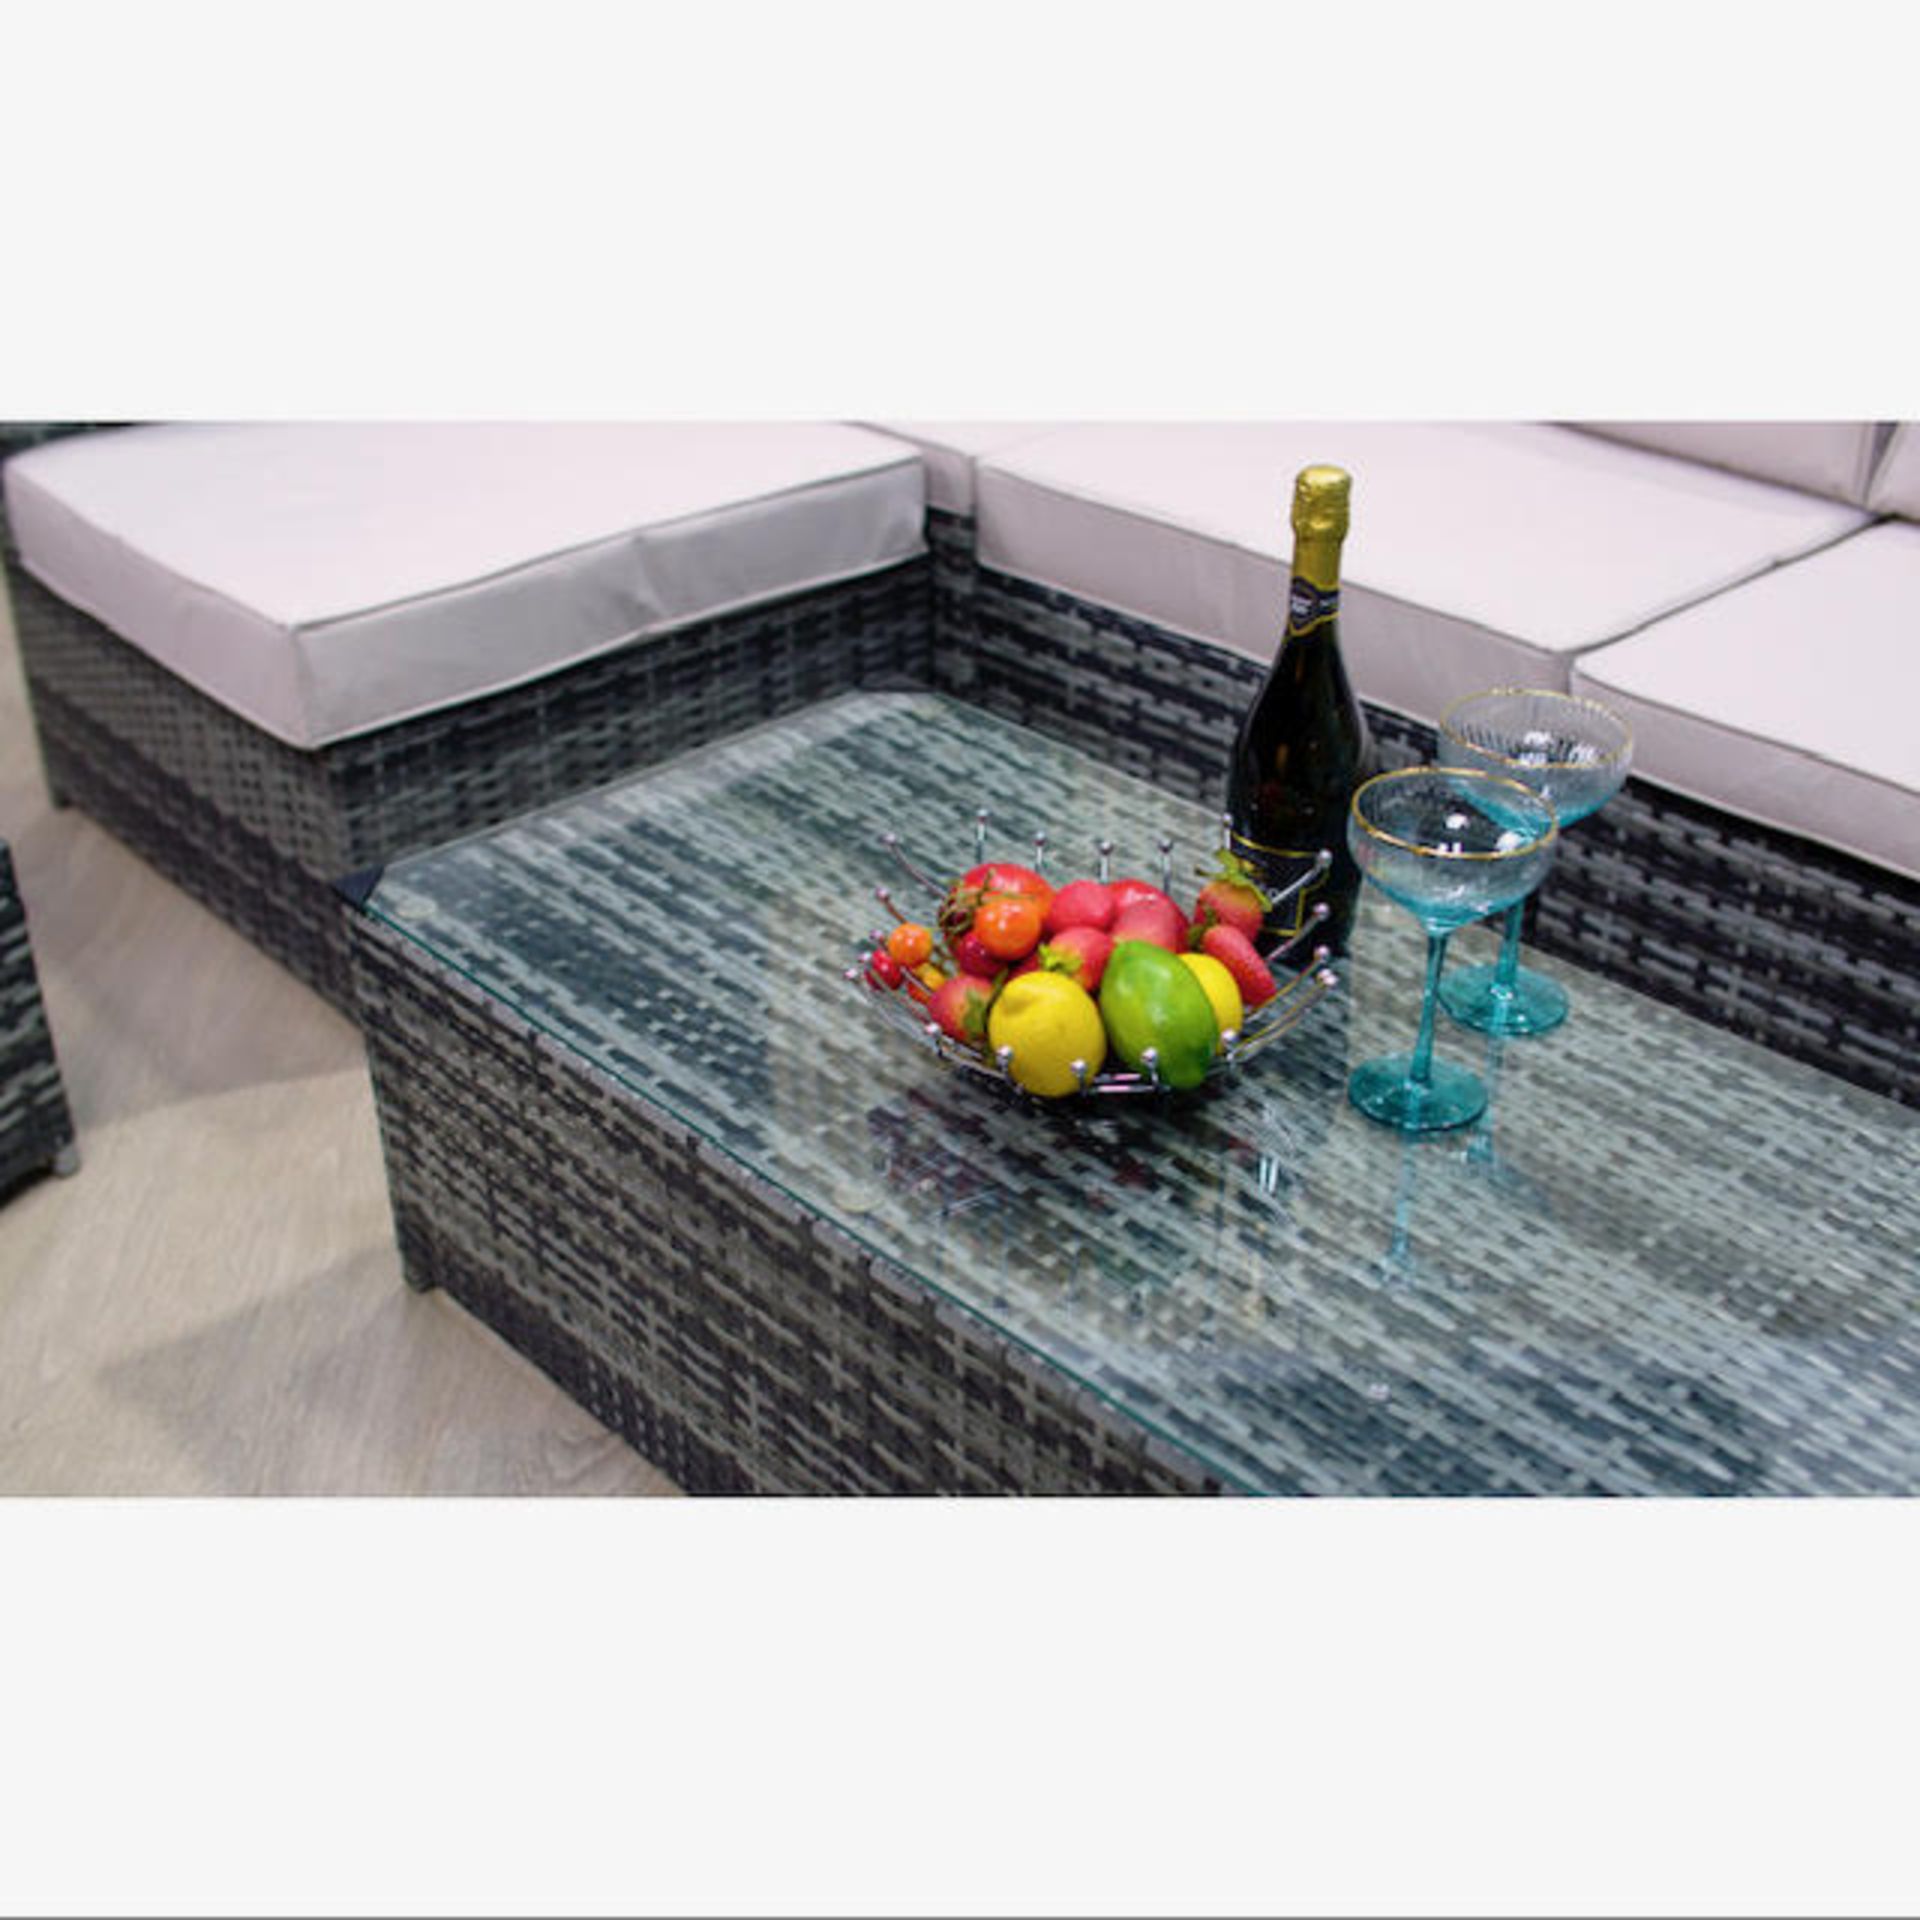 TRADE LOT 5 X BRAND NEW LINEA 7 PIECE LUXURY RATTAN SETS RRP £1499 EACH. PERFECT FOR THOSE SUMMER - Image 6 of 6